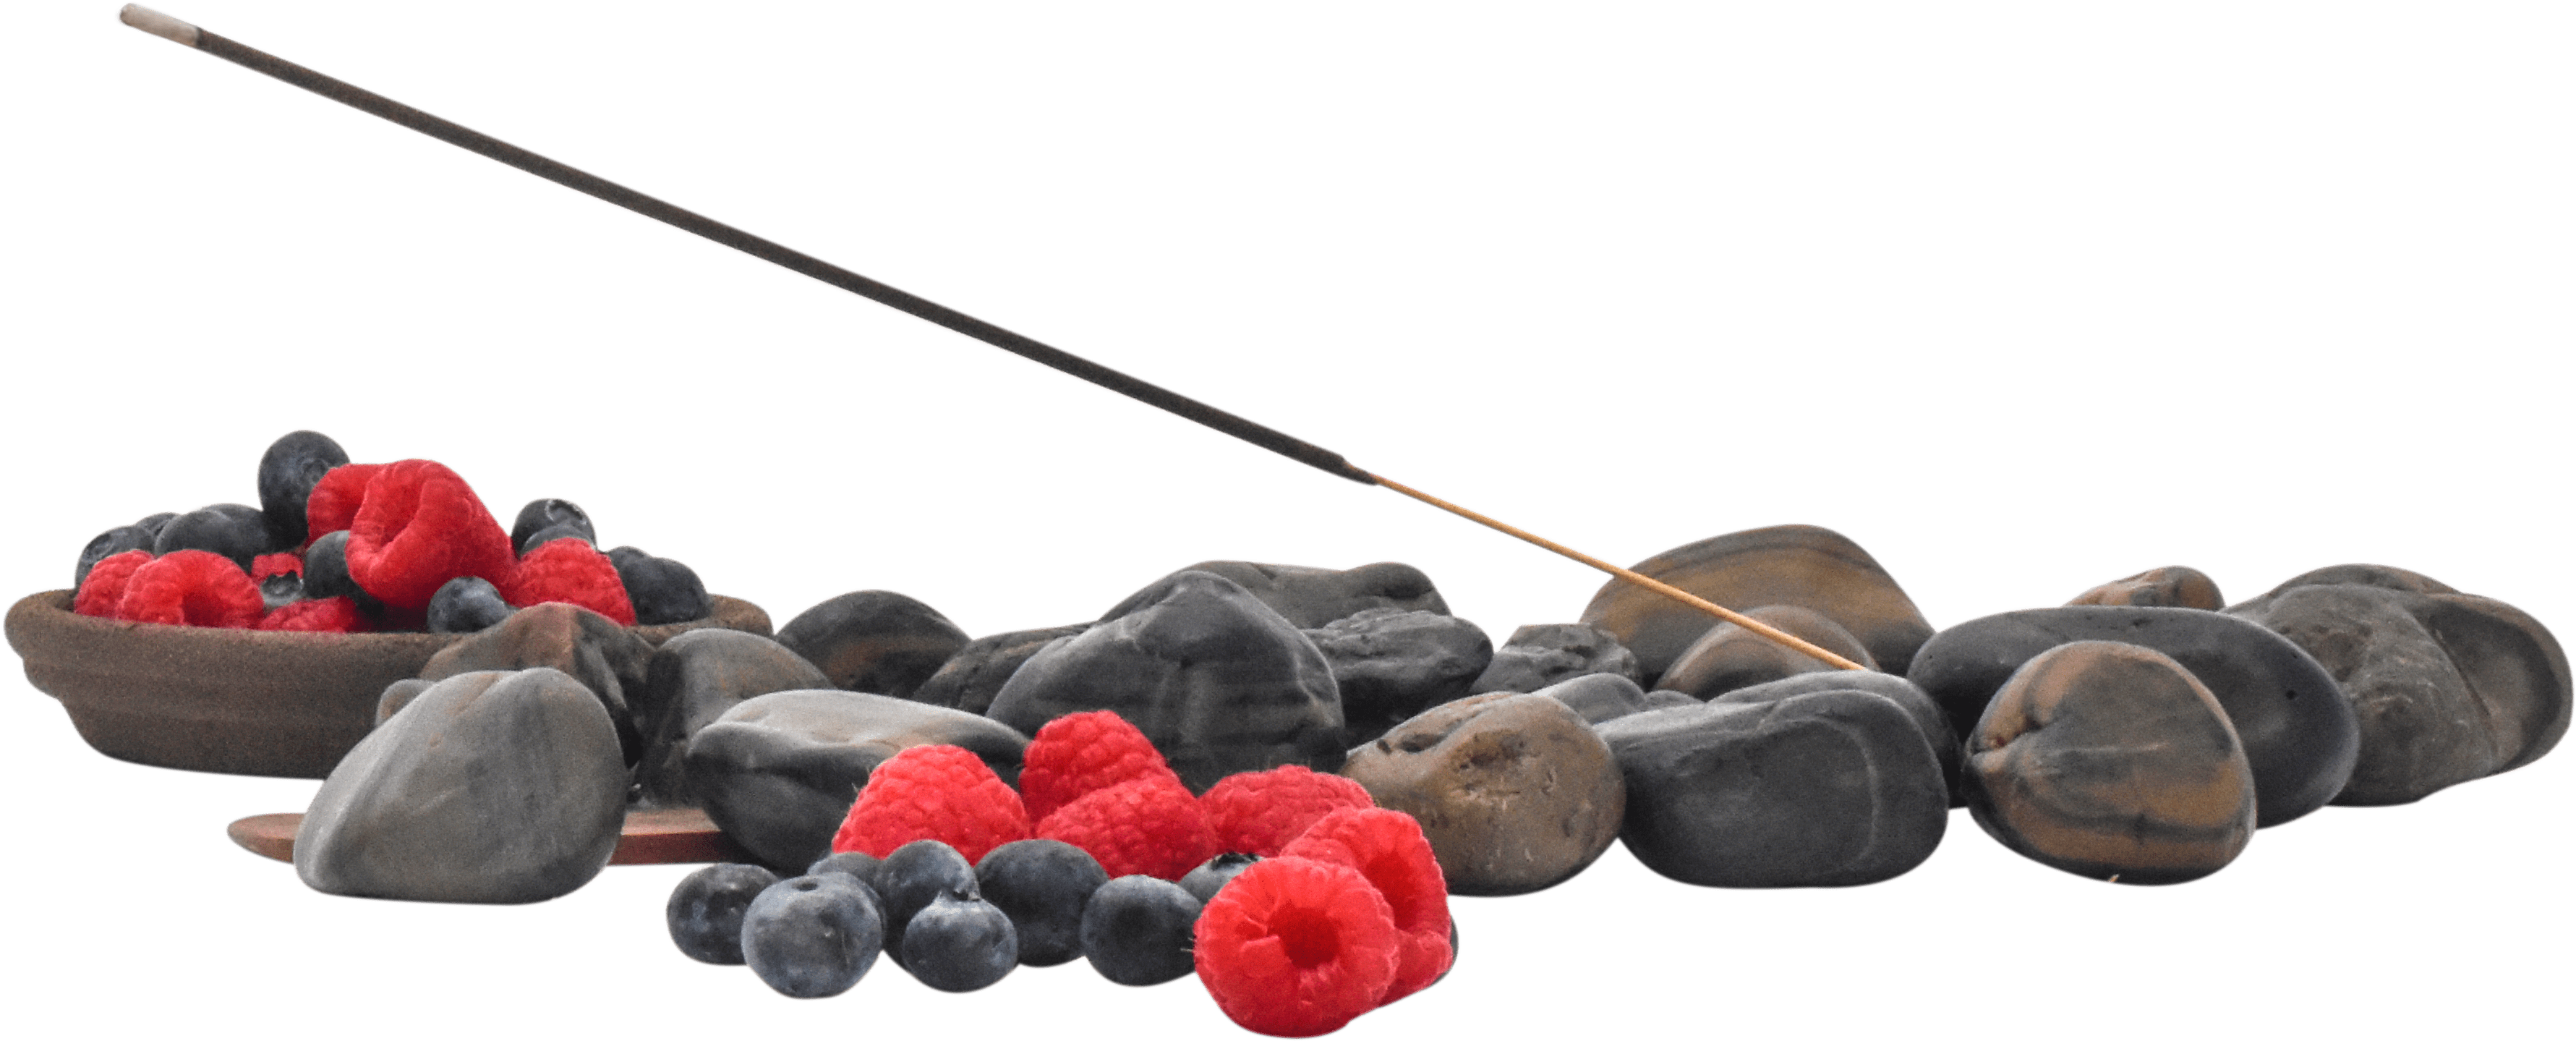 Pendy Co Berries Incense Product Image - Lingonberry, Hd Png Download